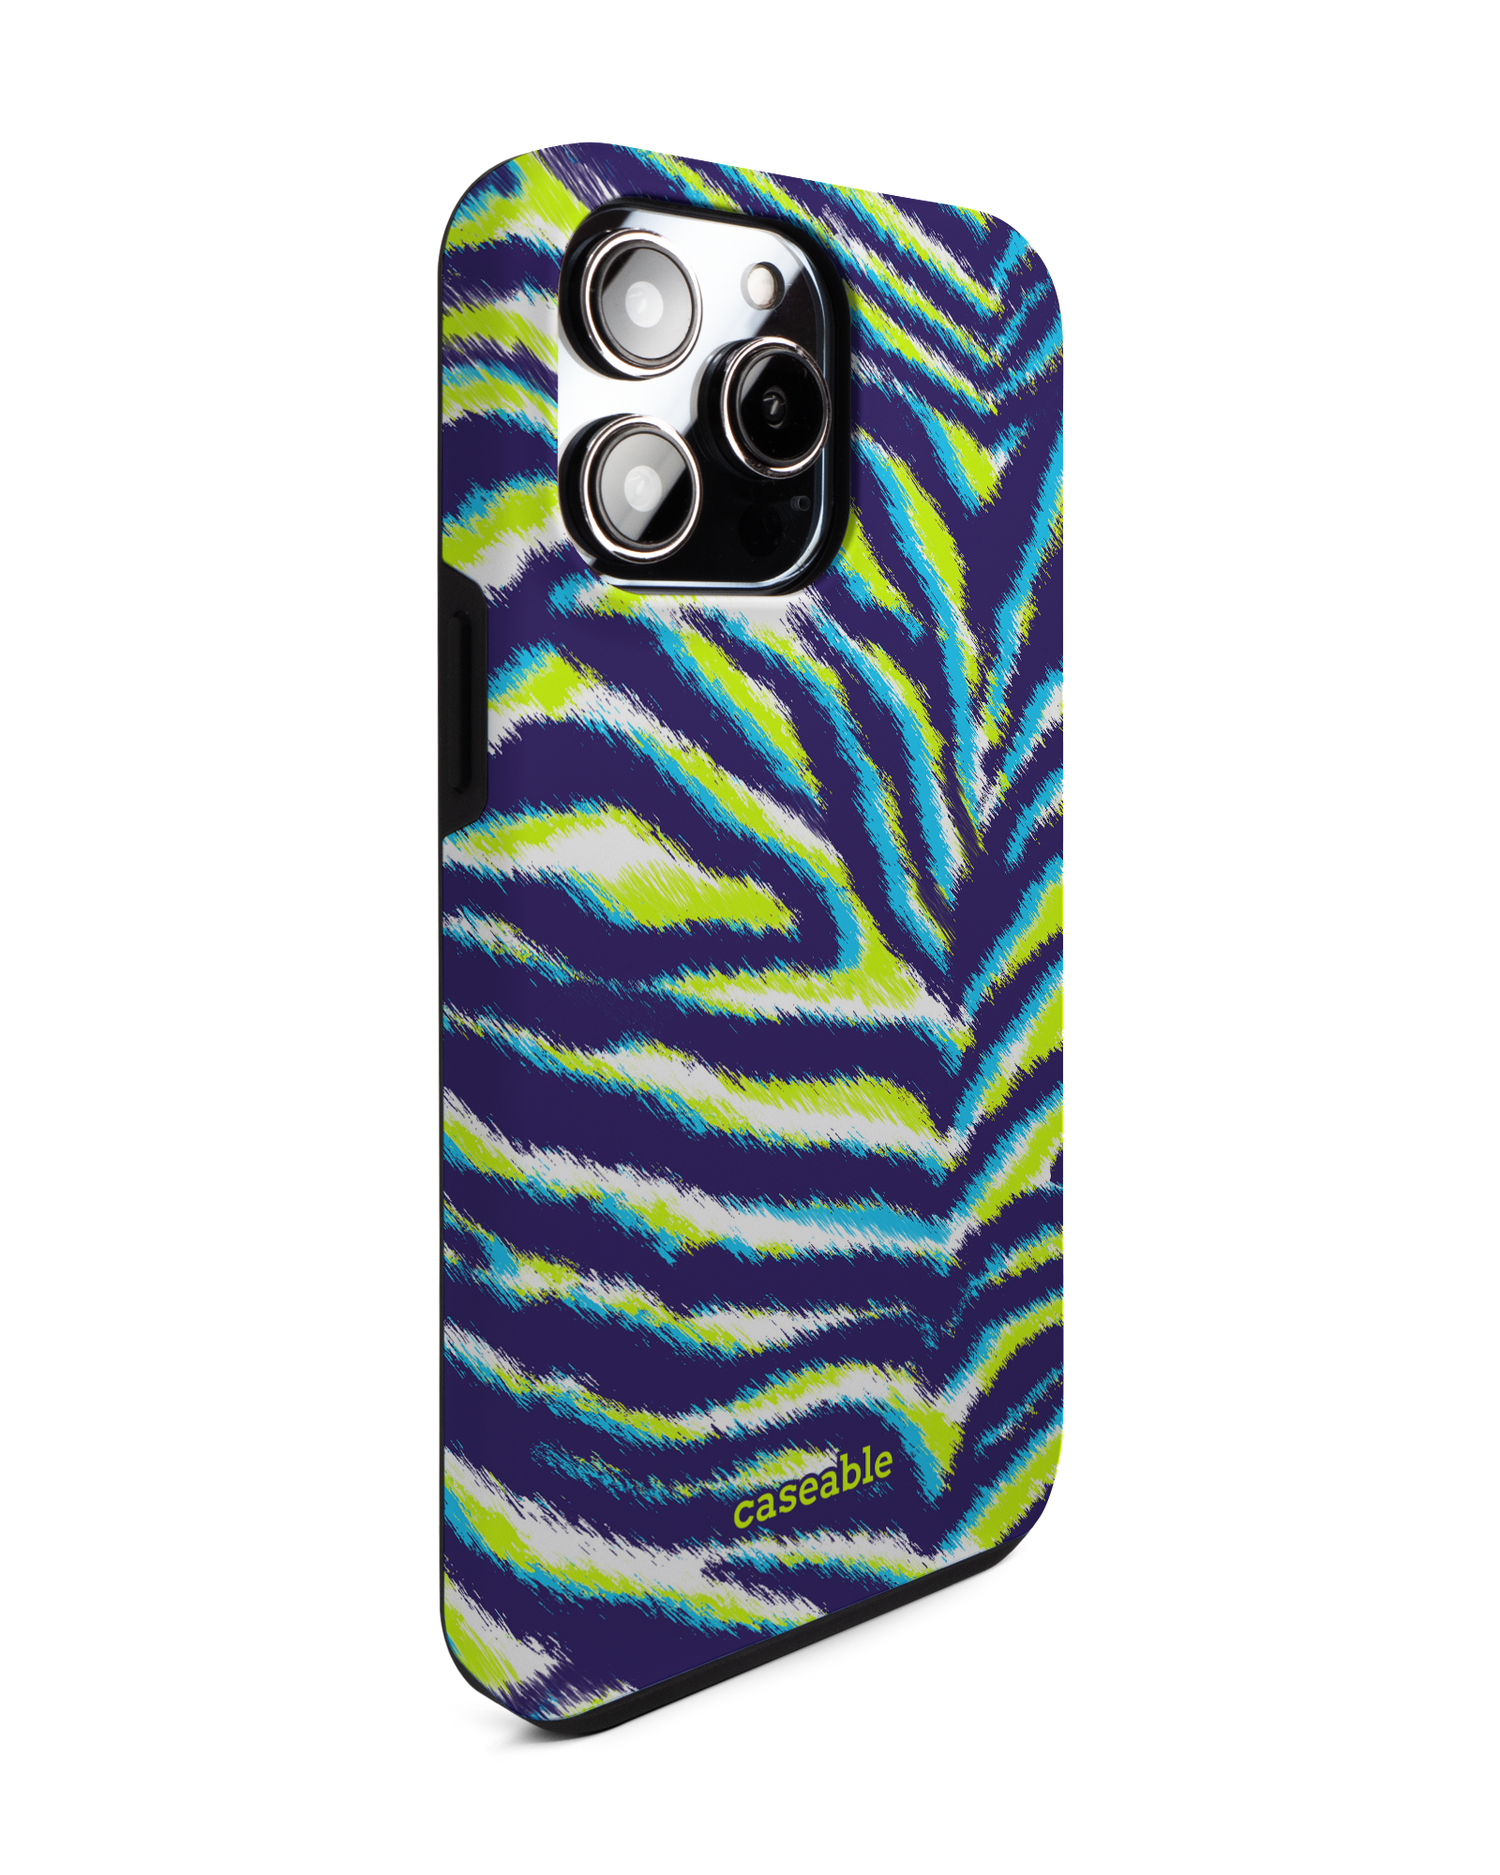 Neon Zebra Premium Phone Case for Apple iPhone 14 Pro Max: View from the left side